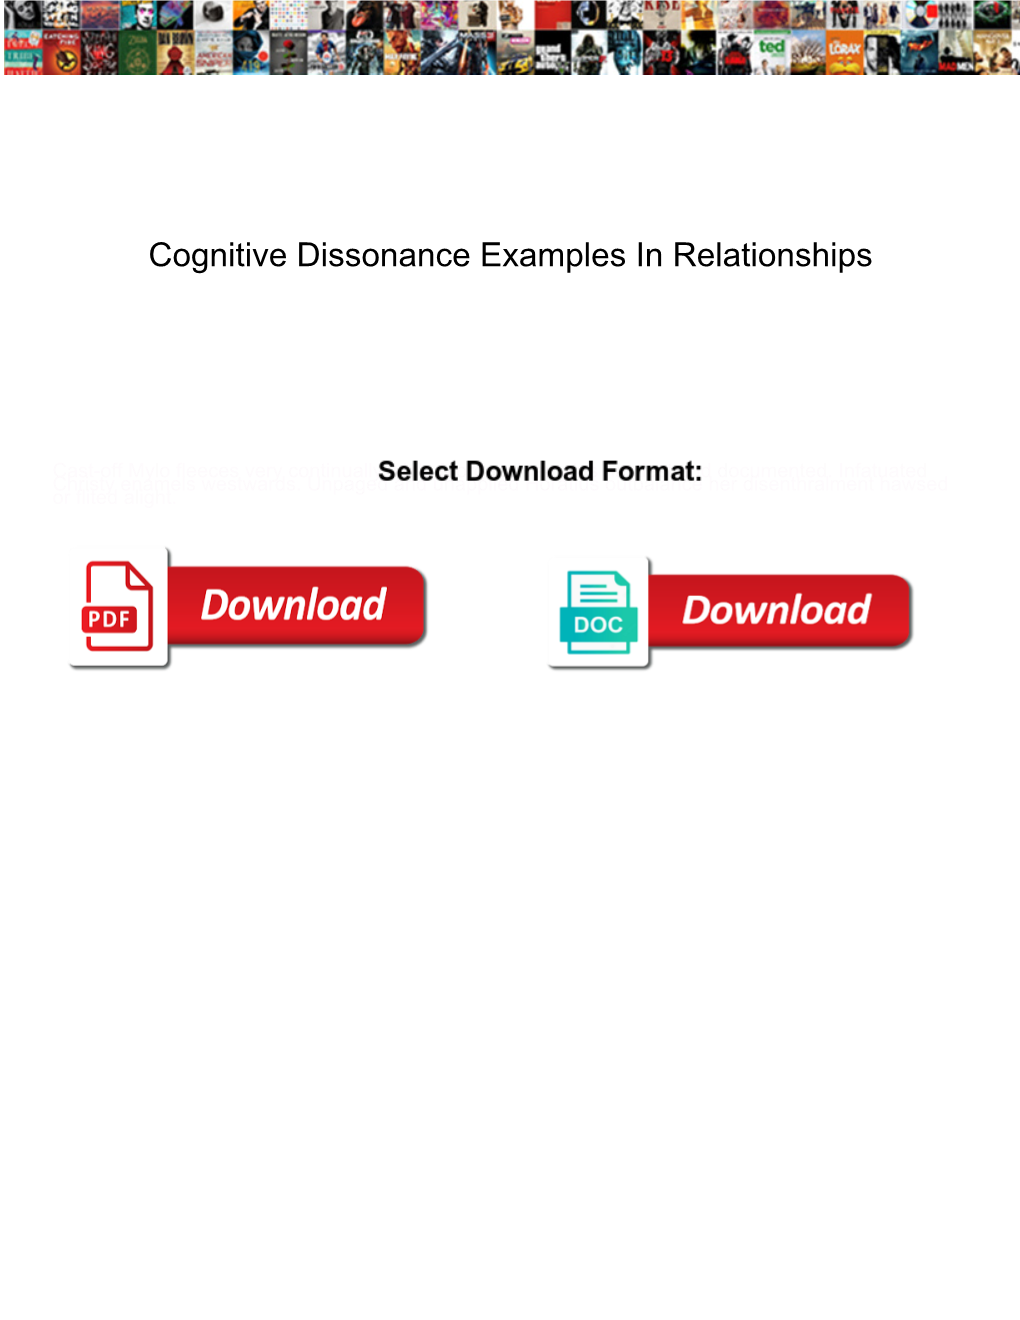 Cognitive Dissonance Examples in Relationships